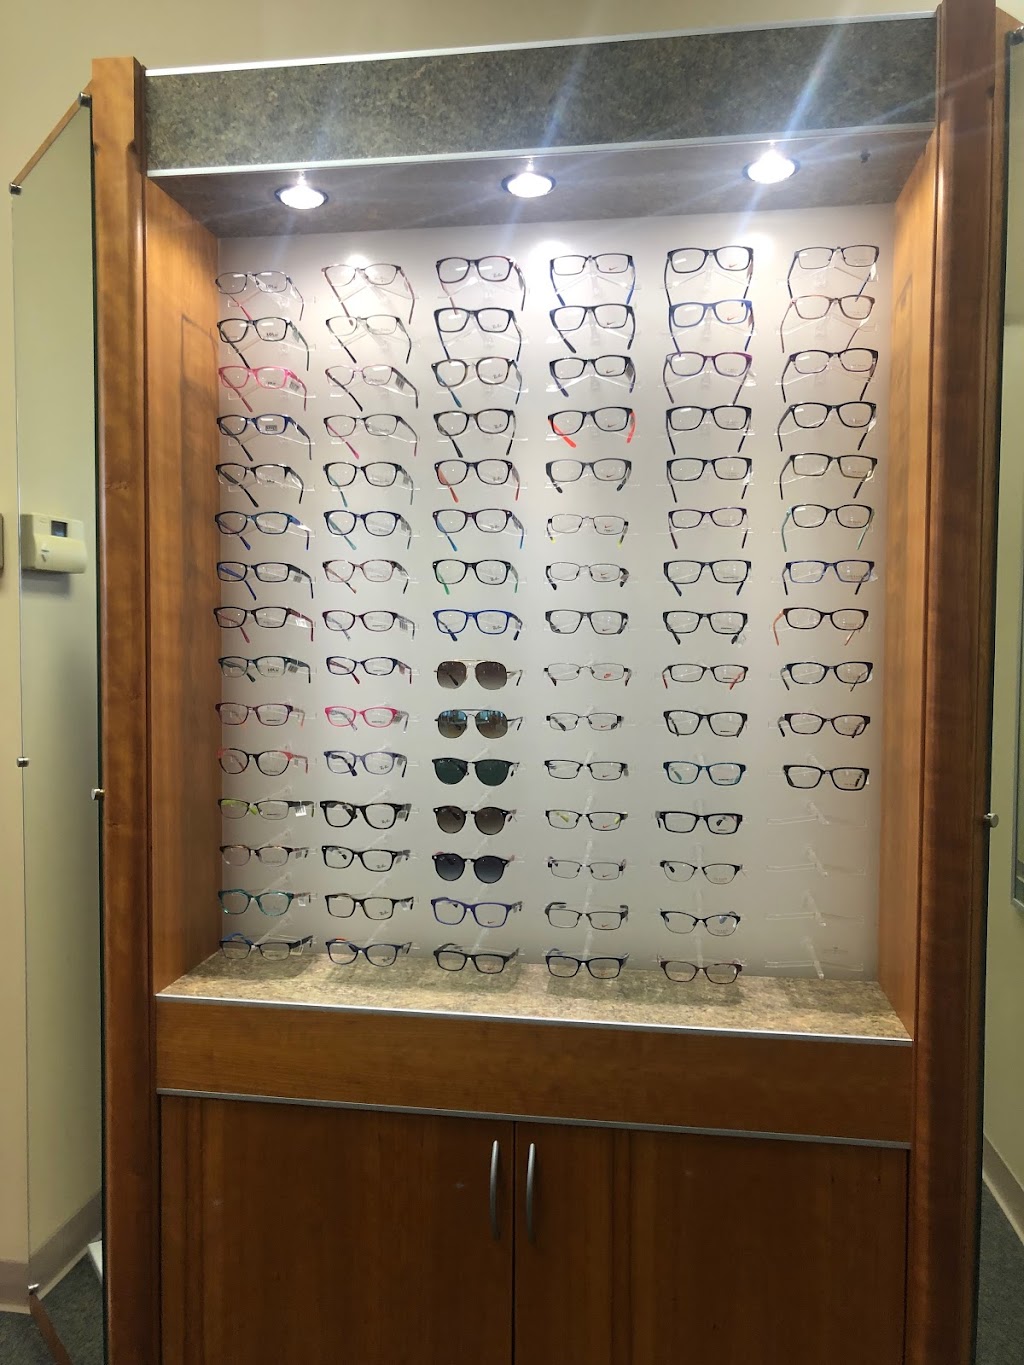 Clarkson Eyecare | 112 Glover Dr, Mt Orab, OH 45154, USA | Phone: (937) 444-2525